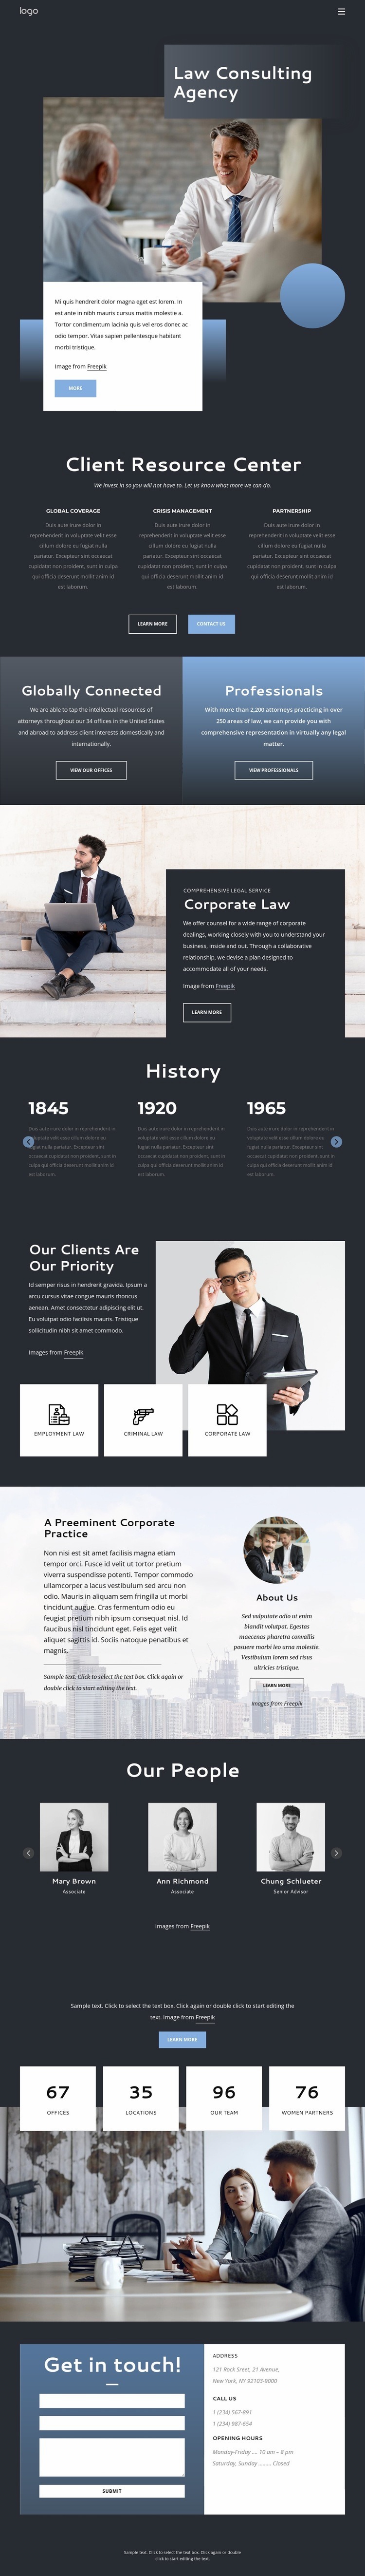 Law consulting agency Web Page Design